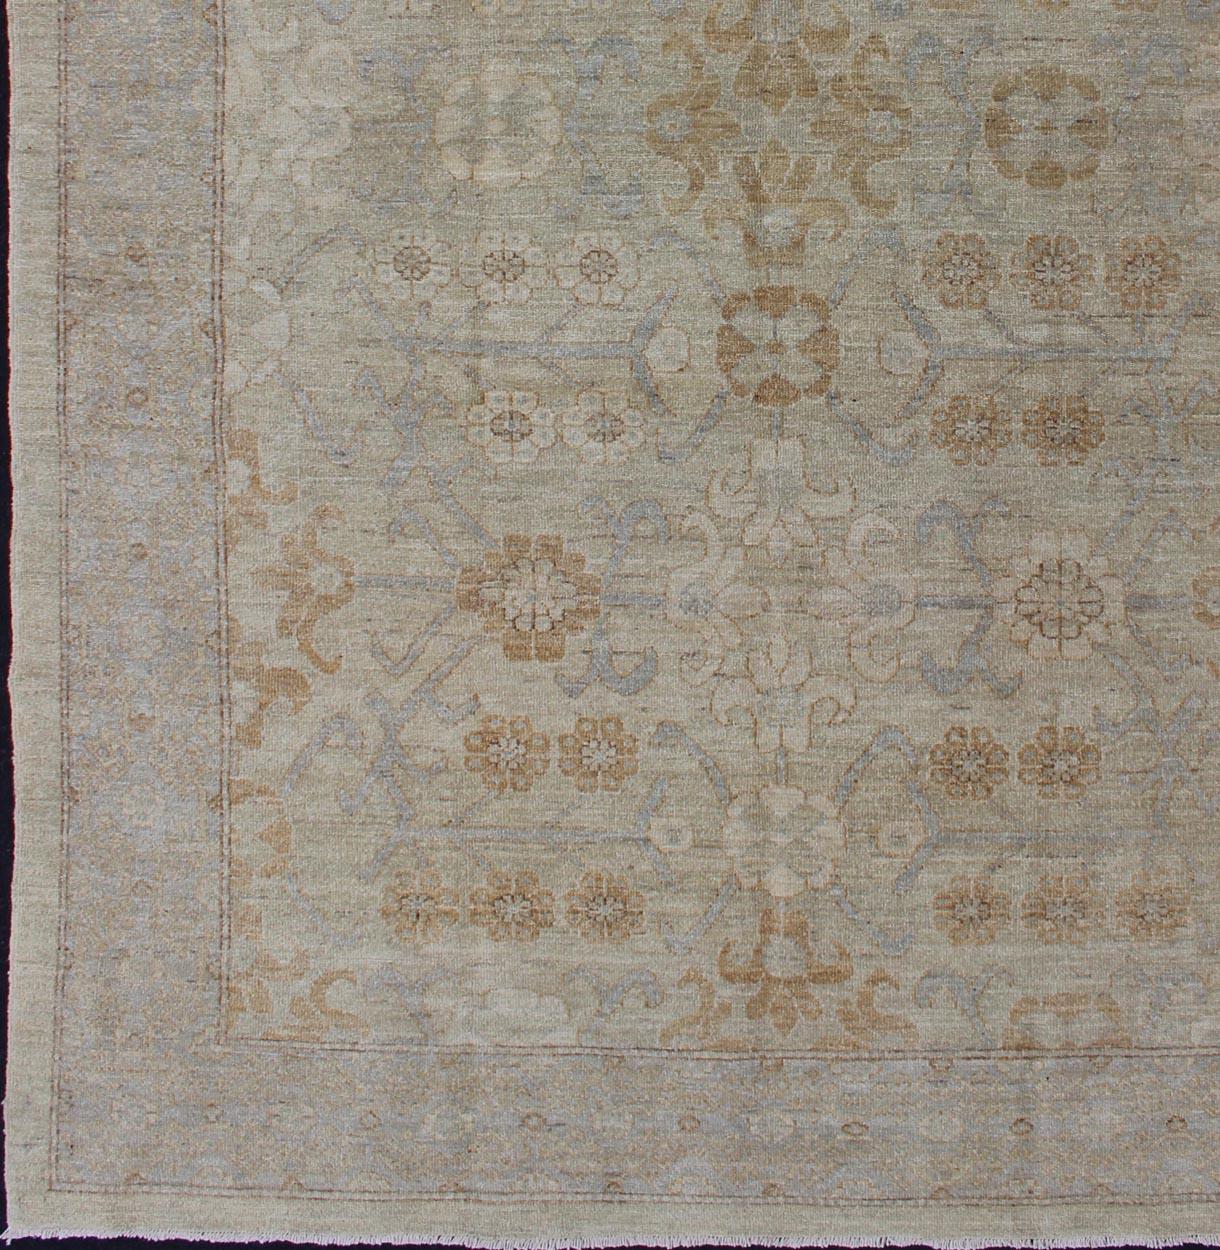 Light colored Khotan Rug with all over Geometric Medallions, rug 1912-281, country of origin / type: Afghanistan / Khotan

Measures: 6'1 x 8'8.

This Khotan features a geometric all-over design flanked by a repeating pattern in the border. The